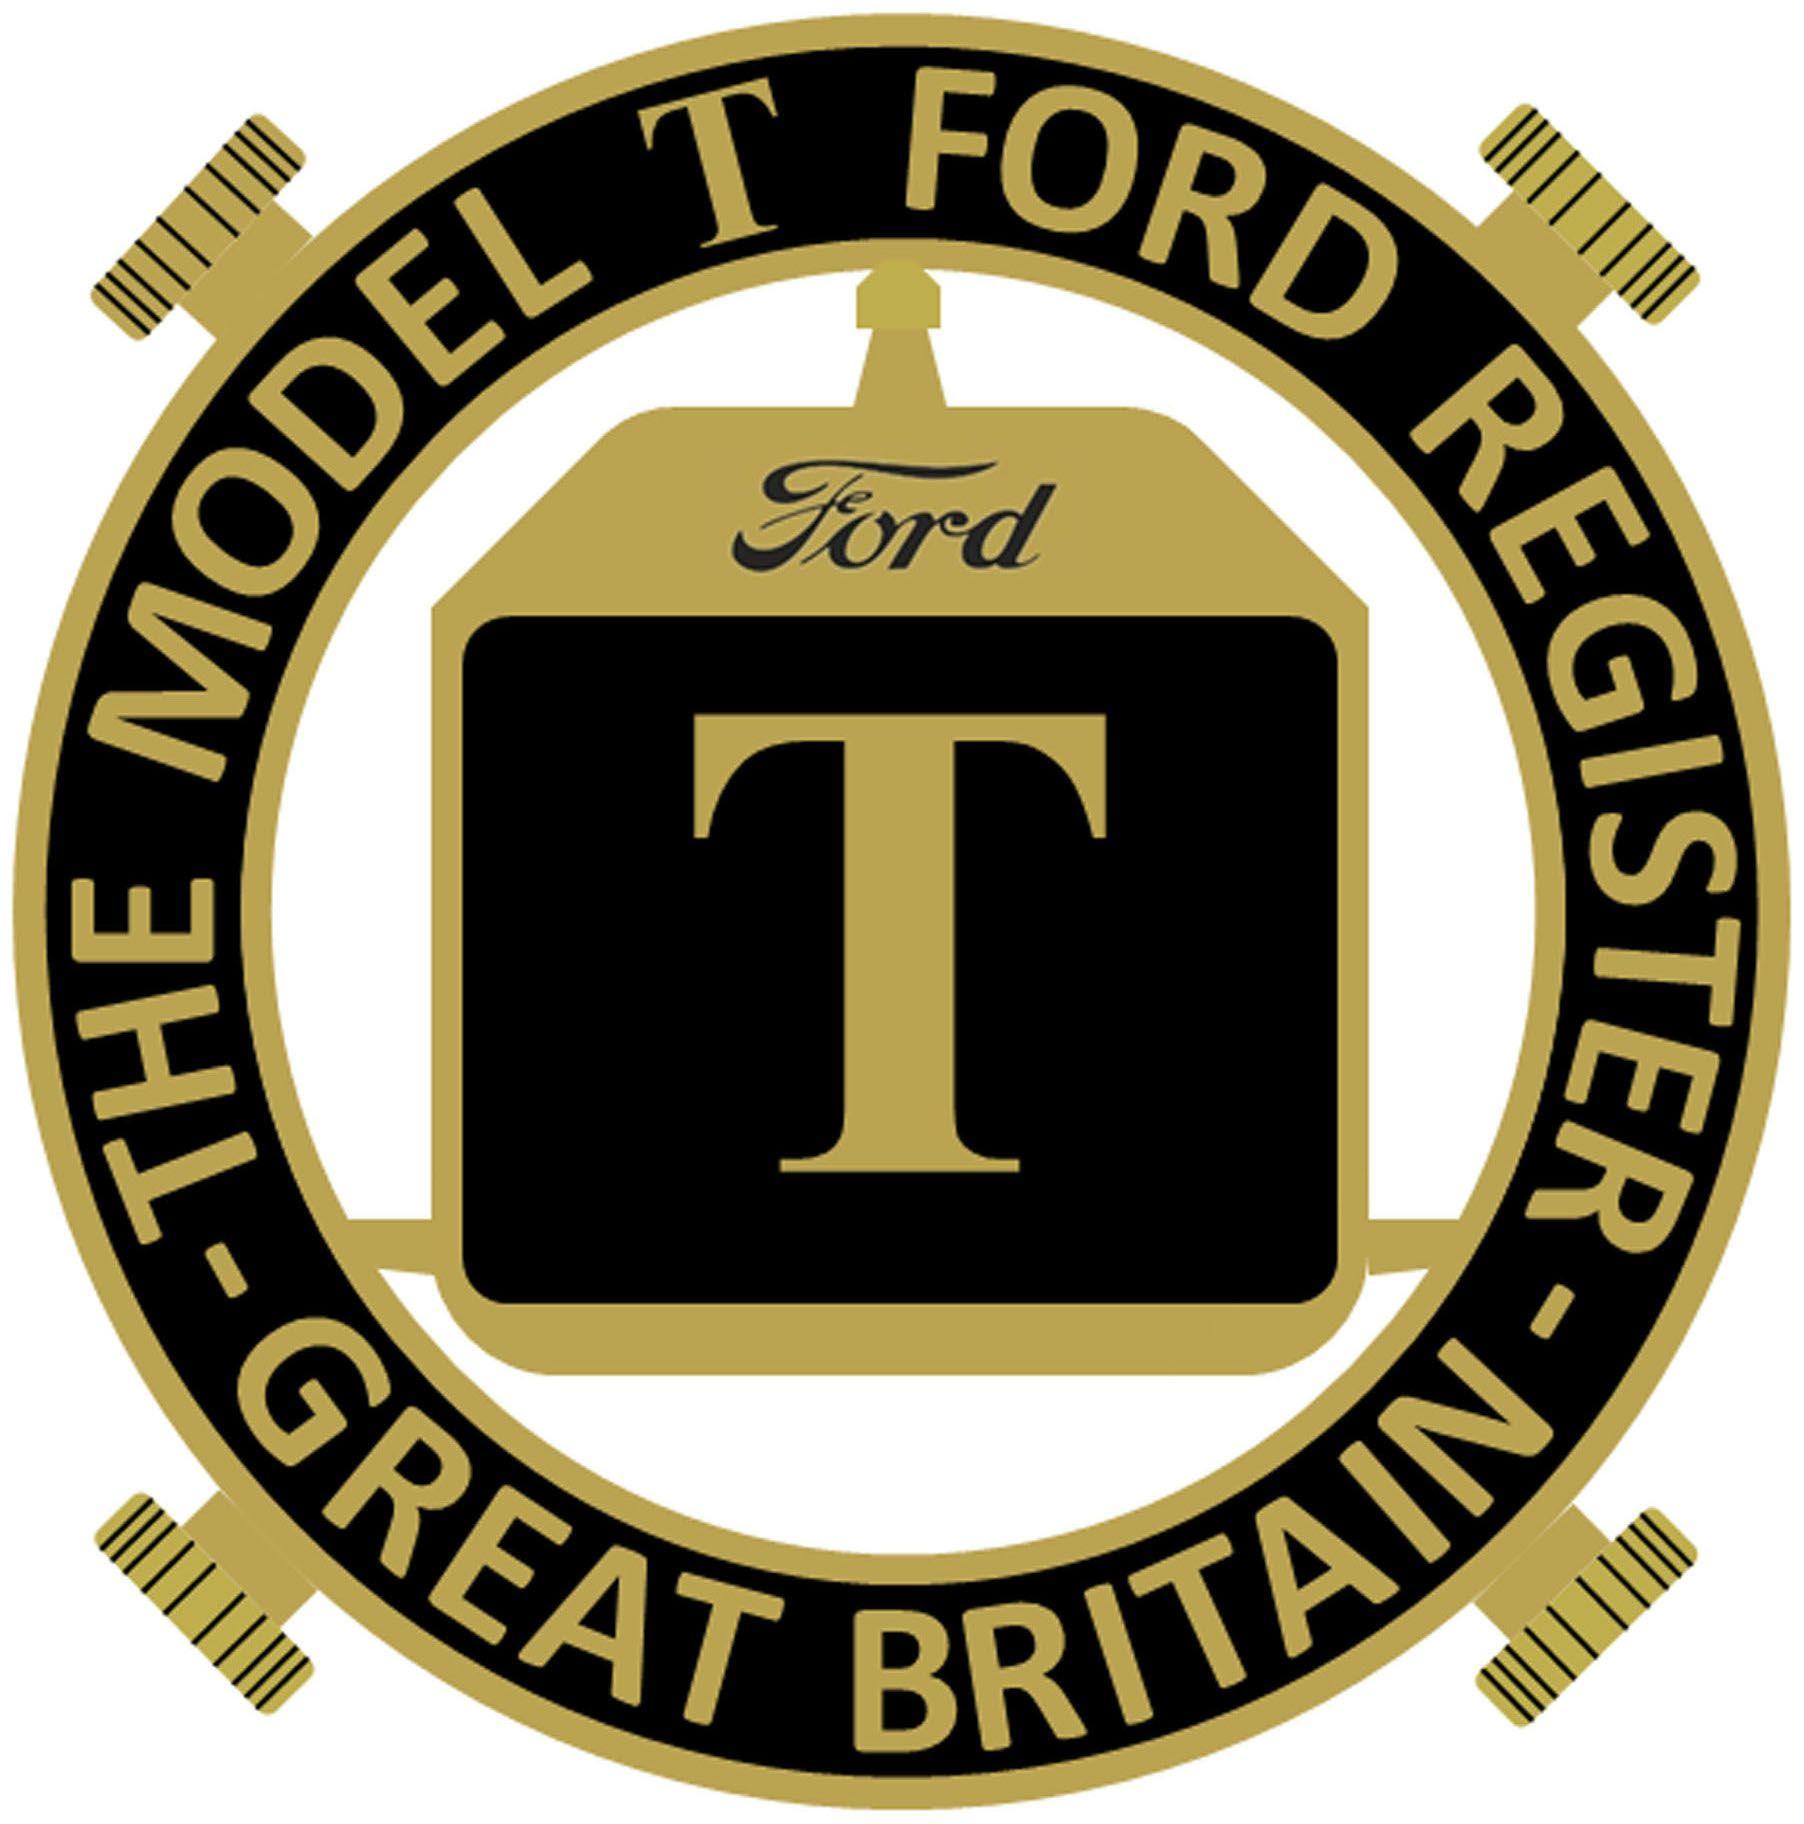 Model T Ford Logo - The Model T Register Club For Model T Ford enthusiasts